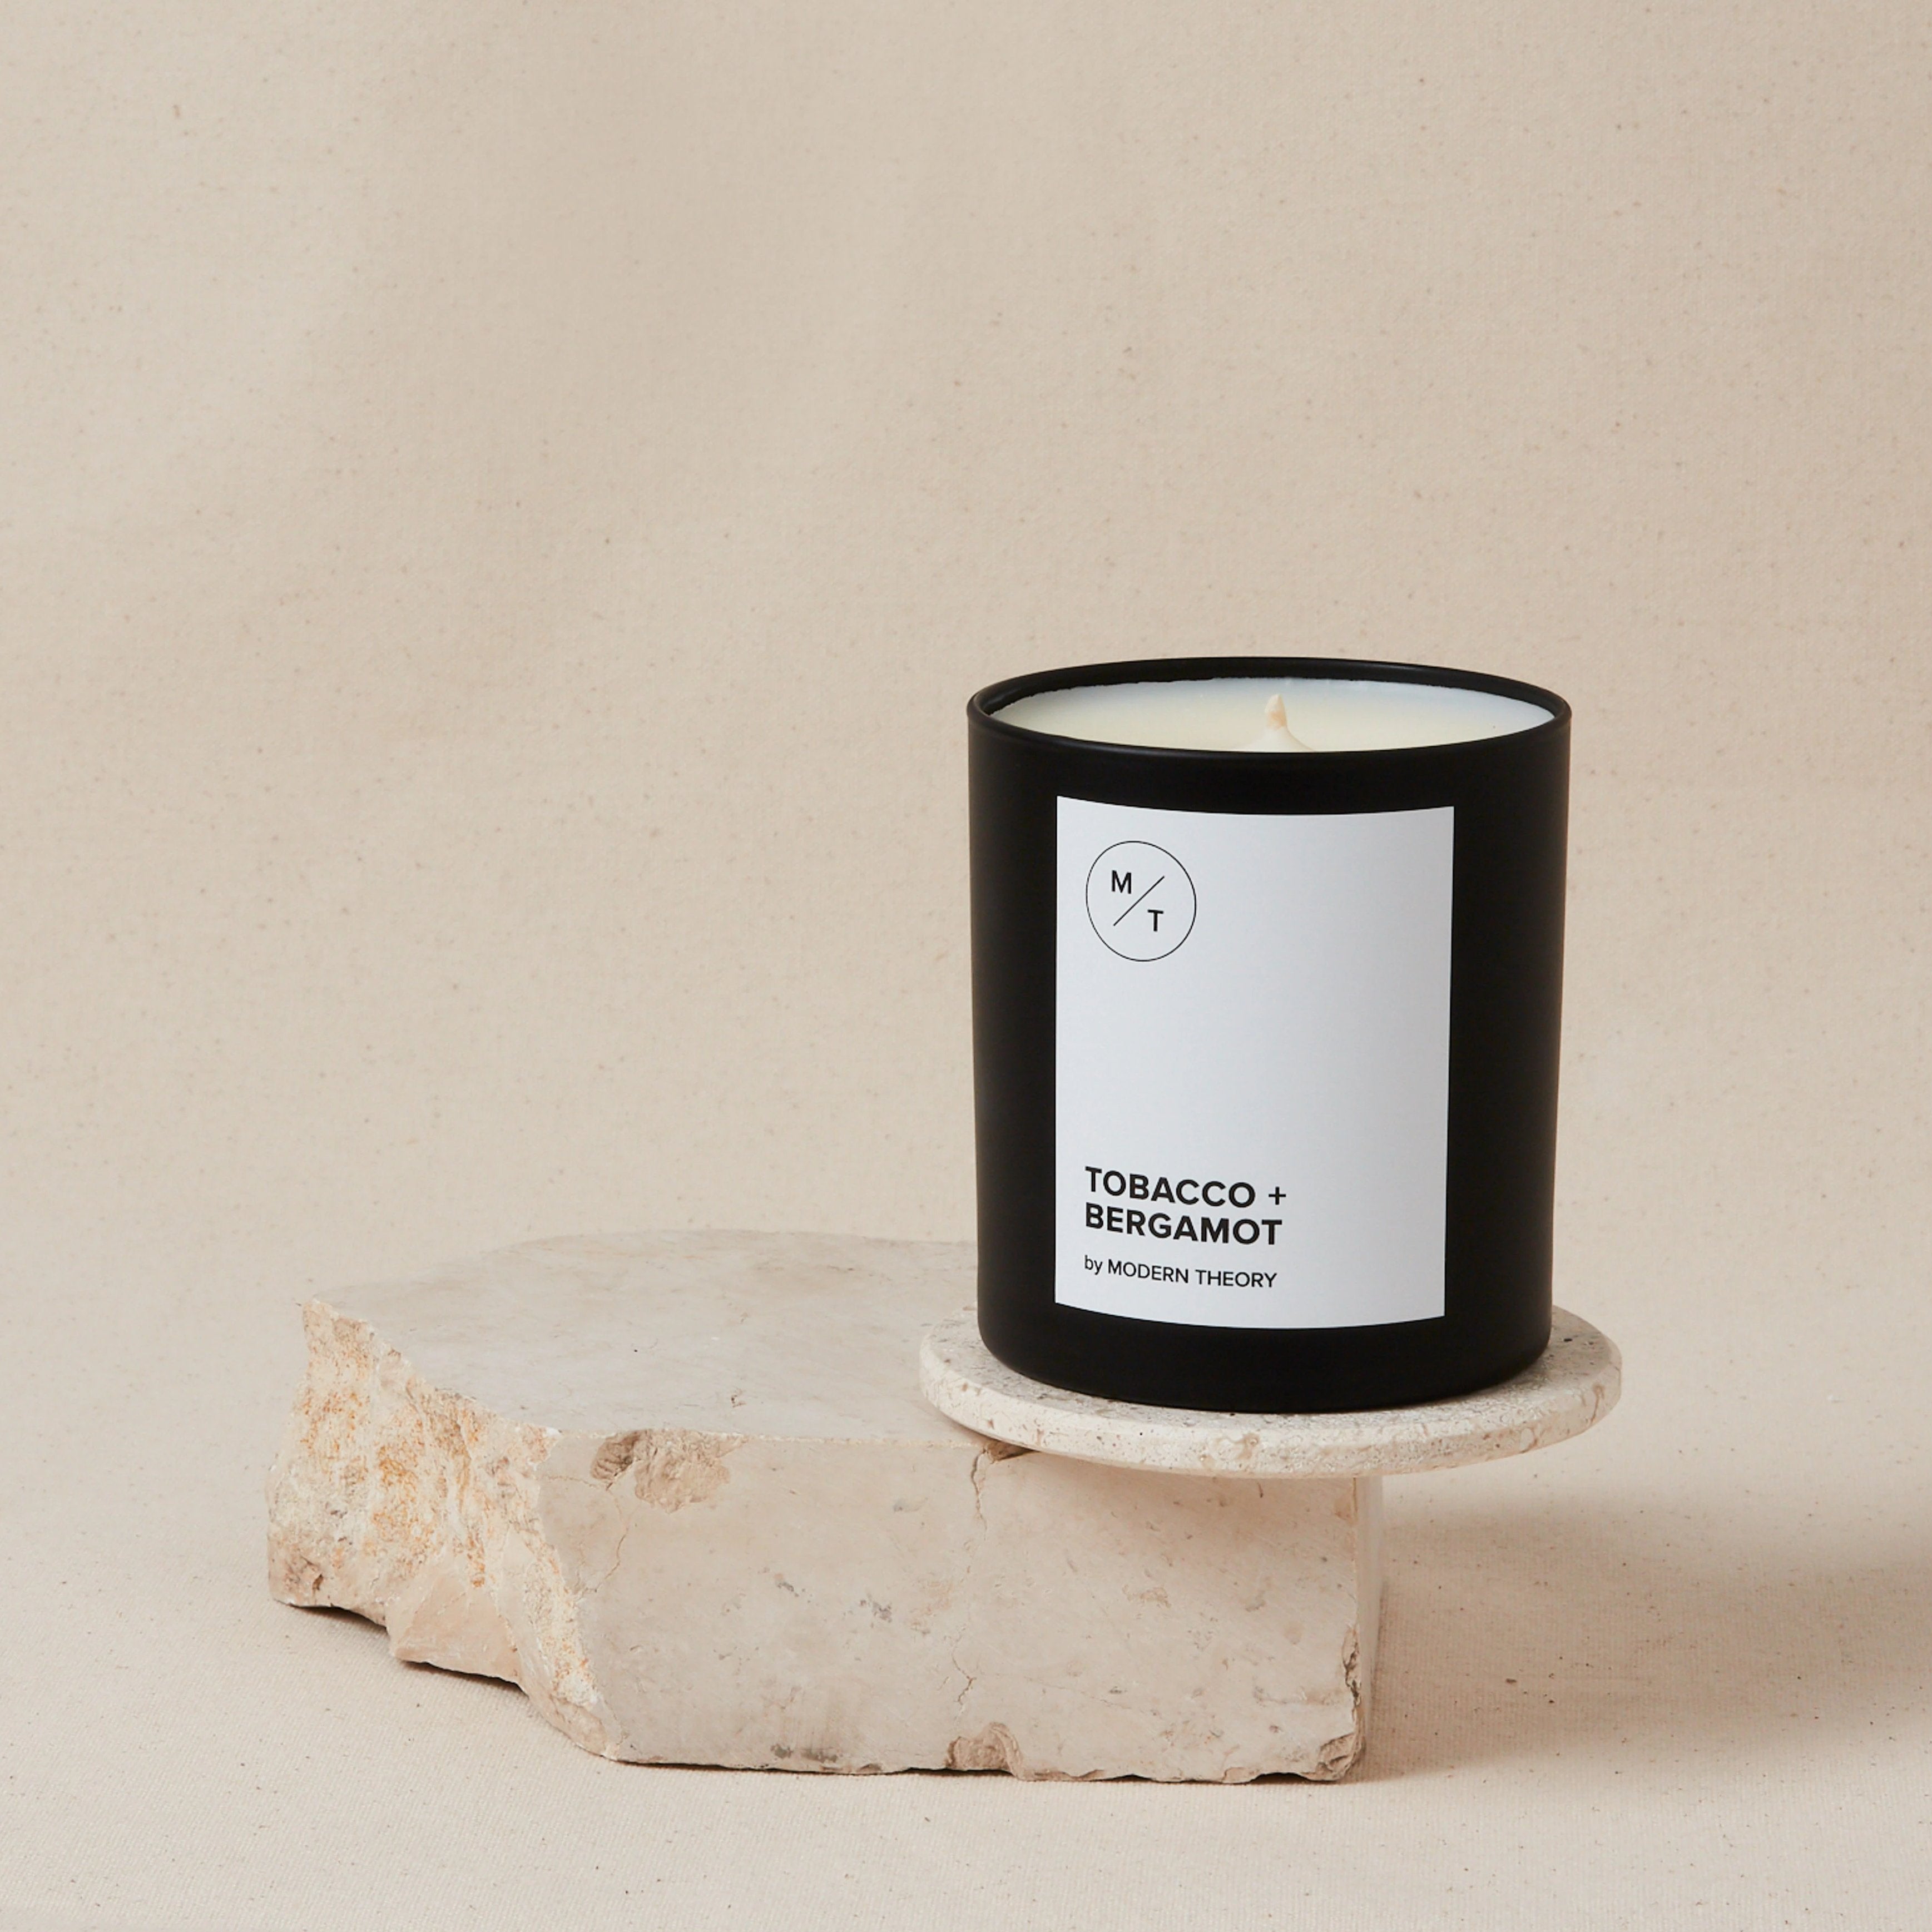 Mother Nature's Best Market Modern Theory Tobacco + Bergamot Candle All-Natural, Cruelty-Free, Gluten-Free, Reusable, Recyclable, Vegan